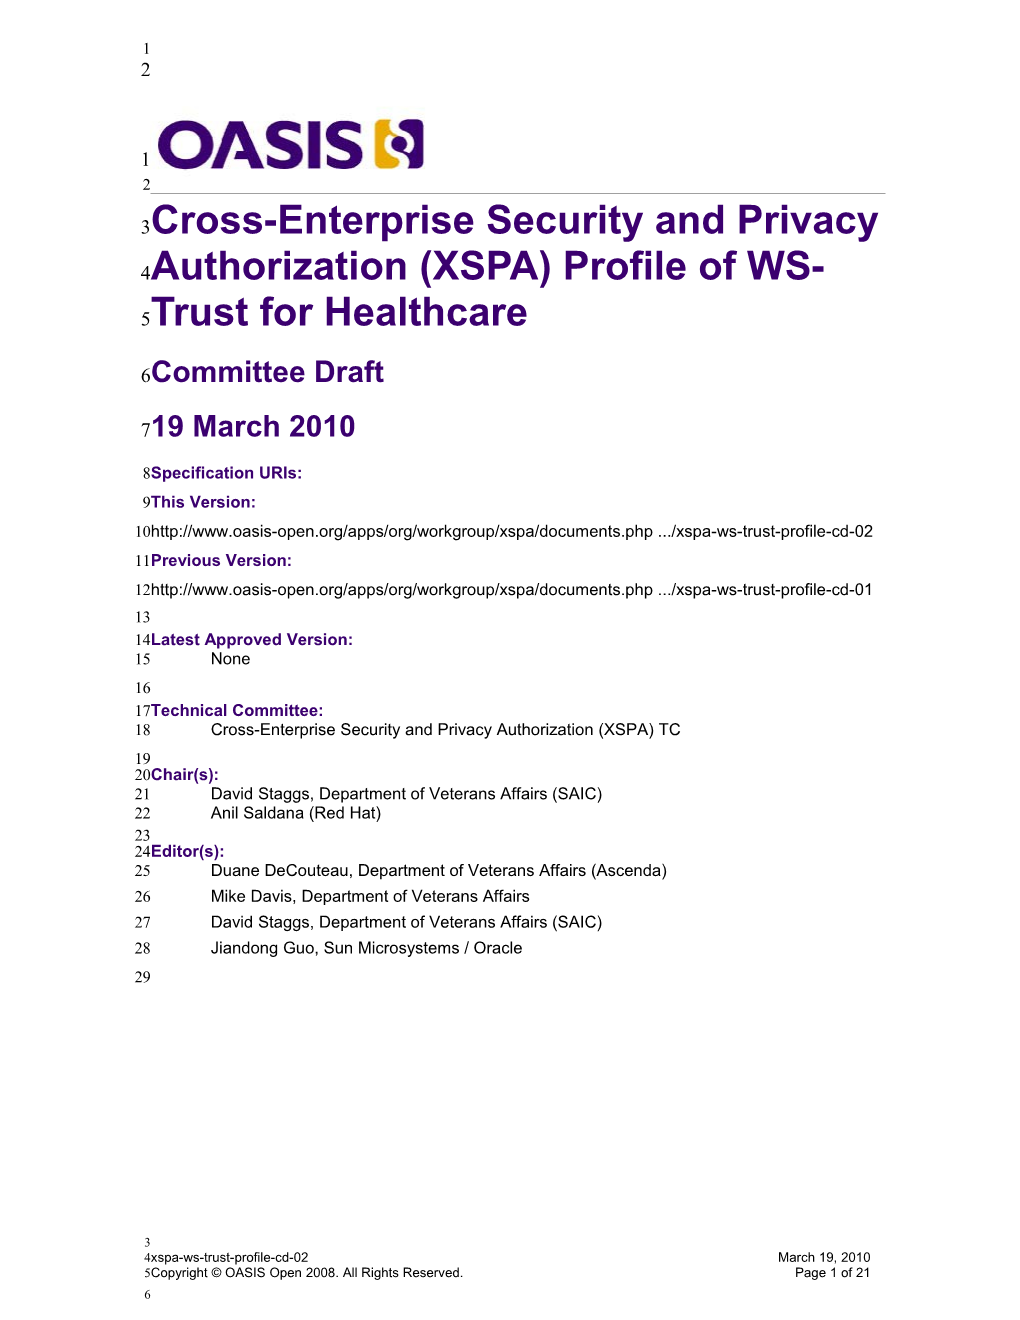 Cross-Enterprise Security and Privacy Authorization (XSPA) Profile of Security Assertion